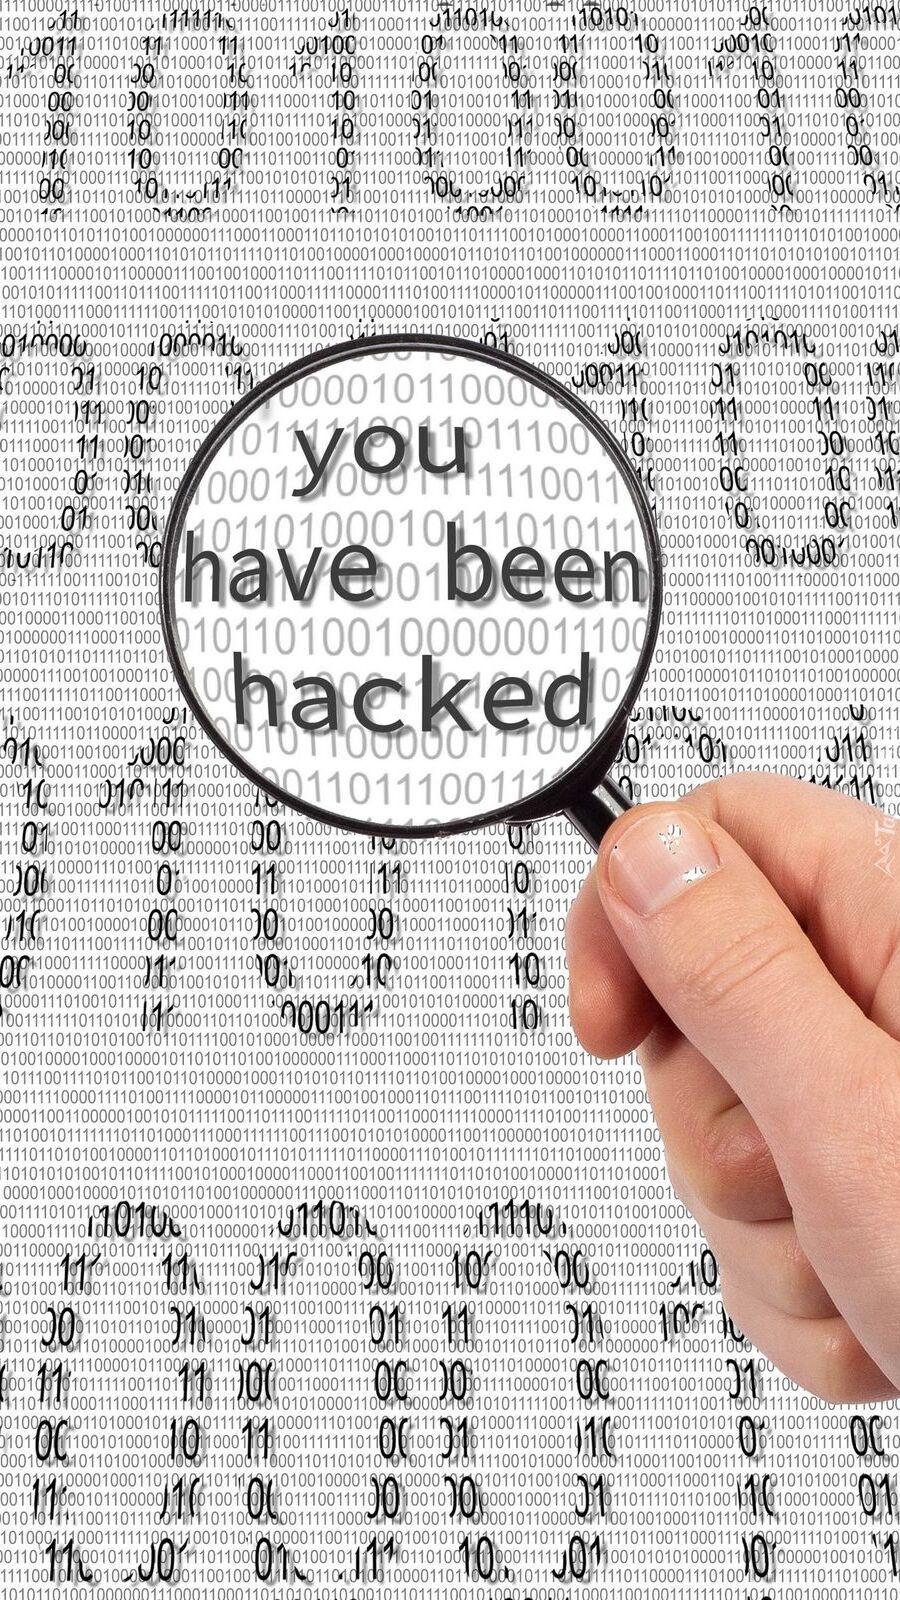 Napis pod lupą you have been hacked